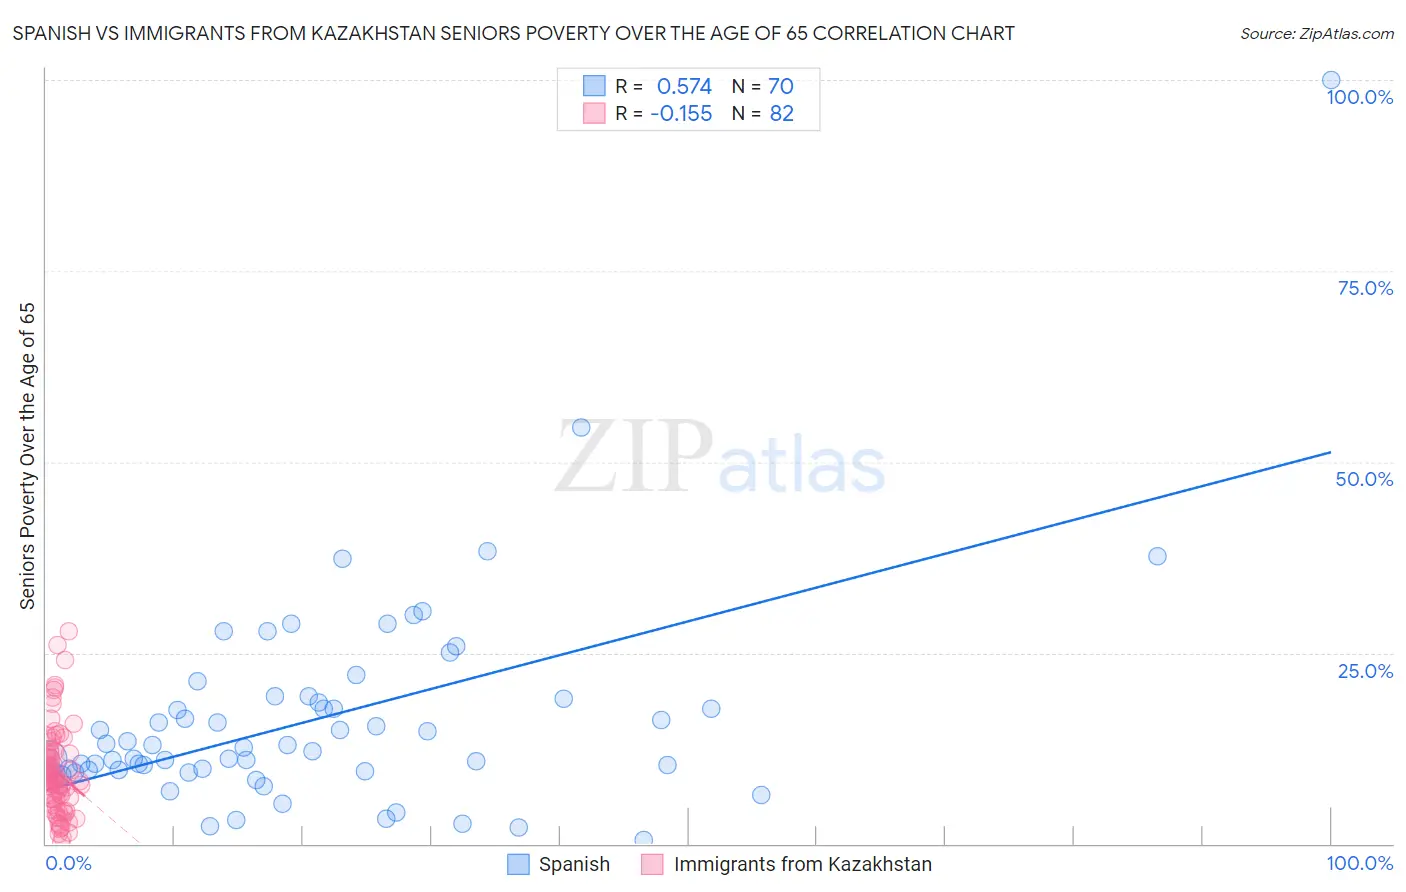 Spanish vs Immigrants from Kazakhstan Seniors Poverty Over the Age of 65